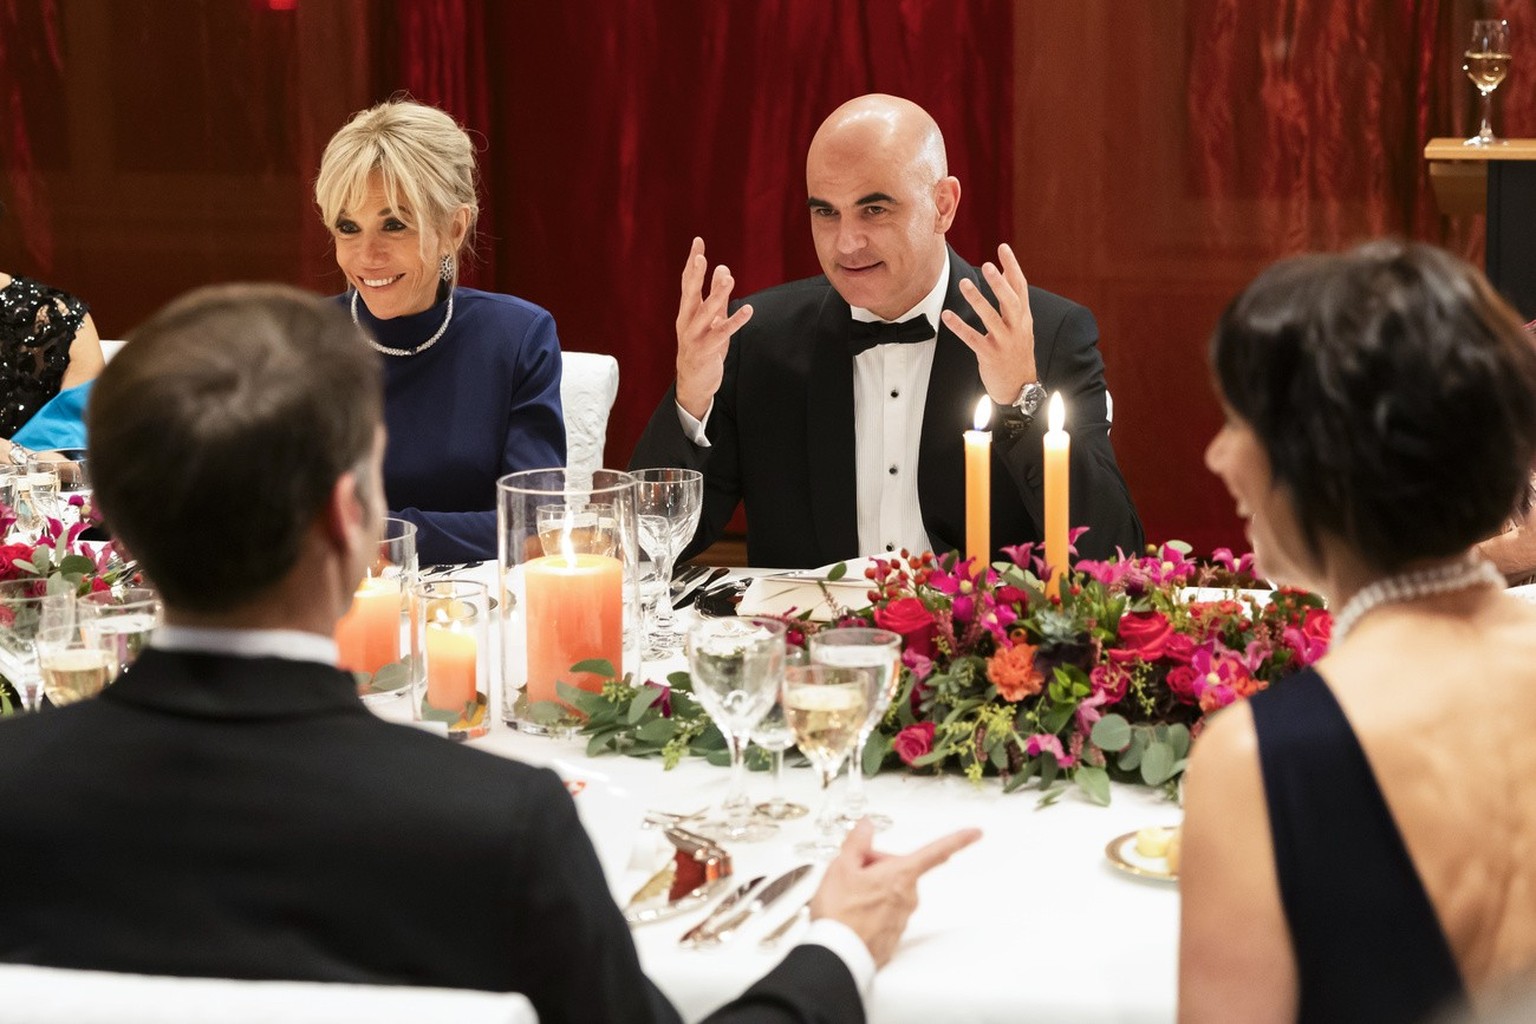 Swiss Federal President Alain Berset, back right, French President Emanuel Macron, front left, Brigitte Macron, back left, and Muriel Zeender Berset, front right, discuss at the state dinner hosted in ...